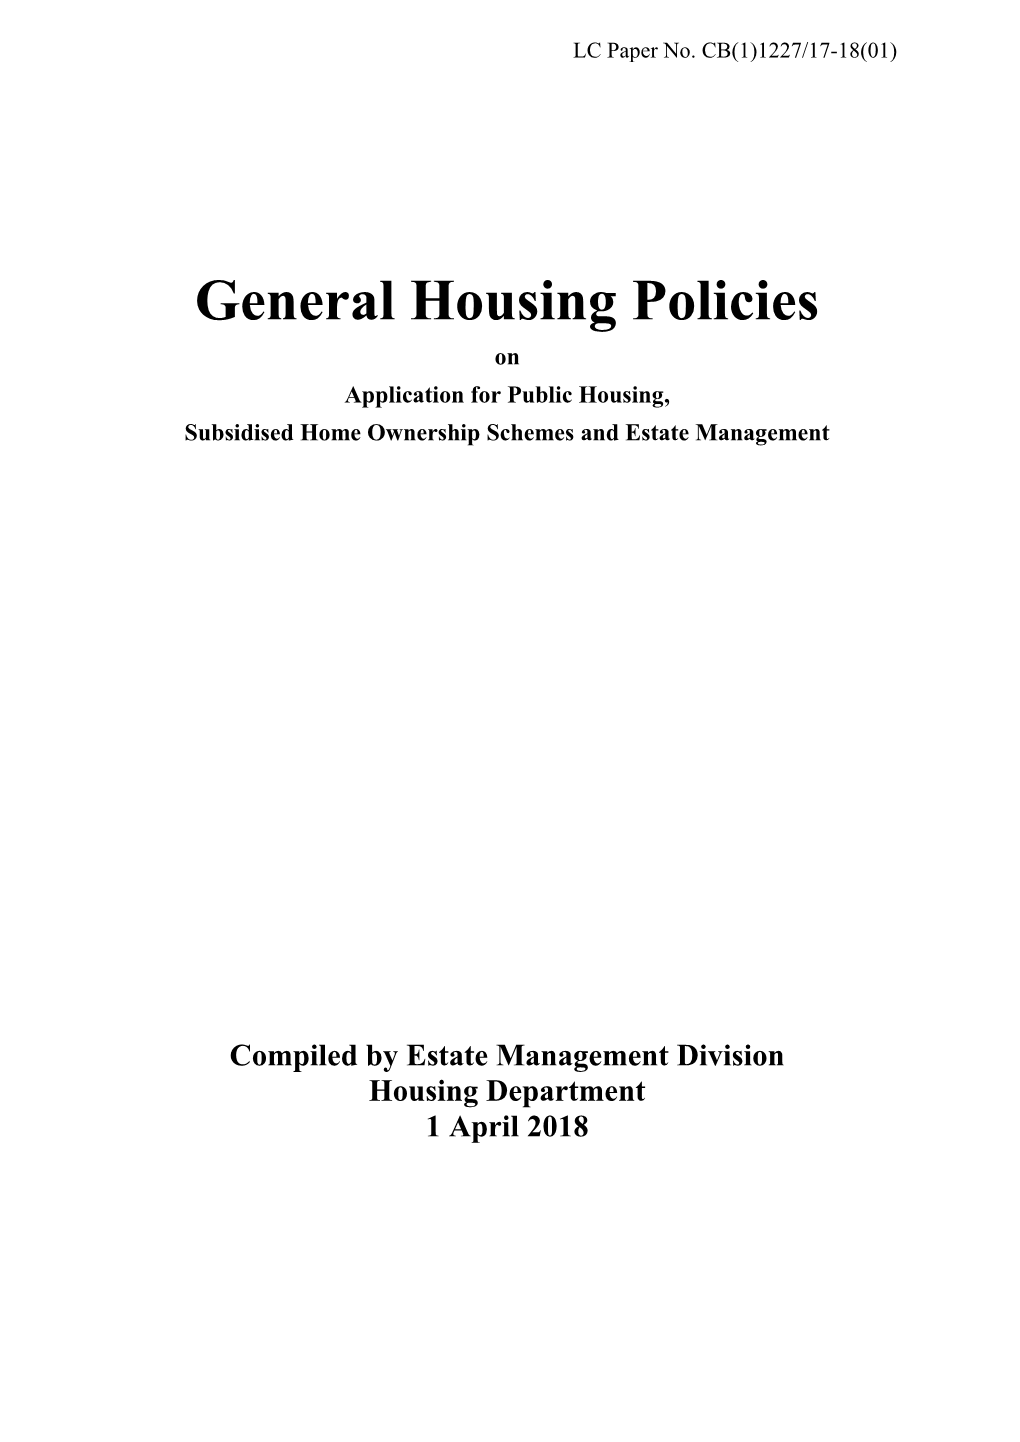 Booklet on General Housing Policies Is for General Reference Purpose Only and Will Be Updated Every April